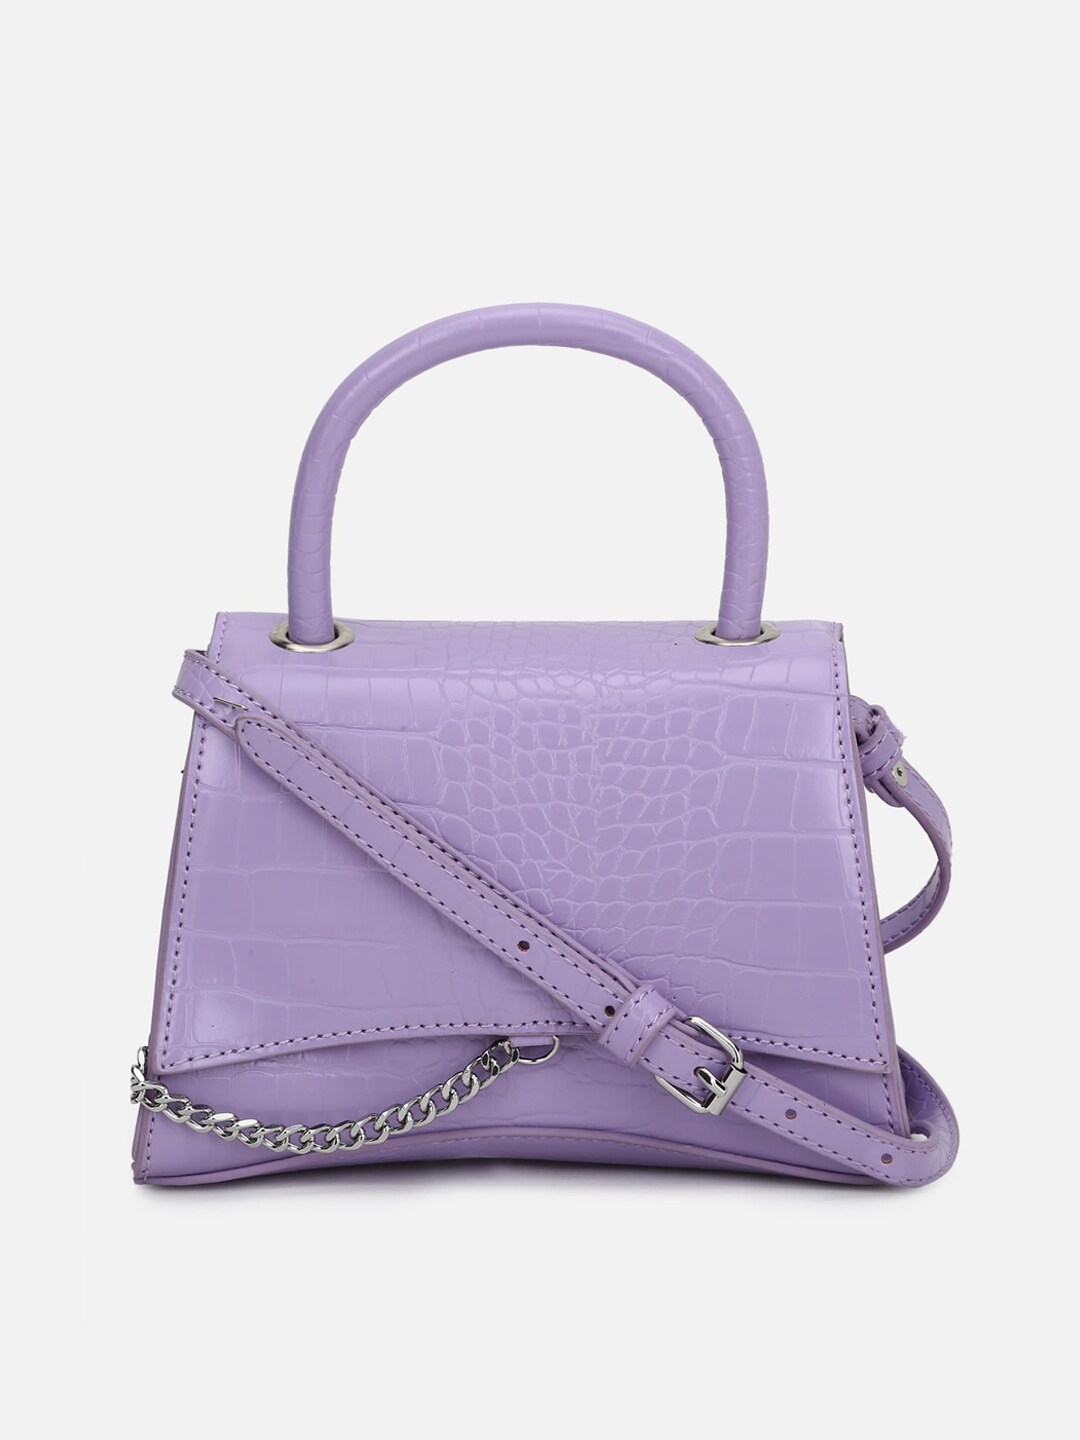 FOREVER 21 Purple Textured PU Structured Handheld Bag Price in India